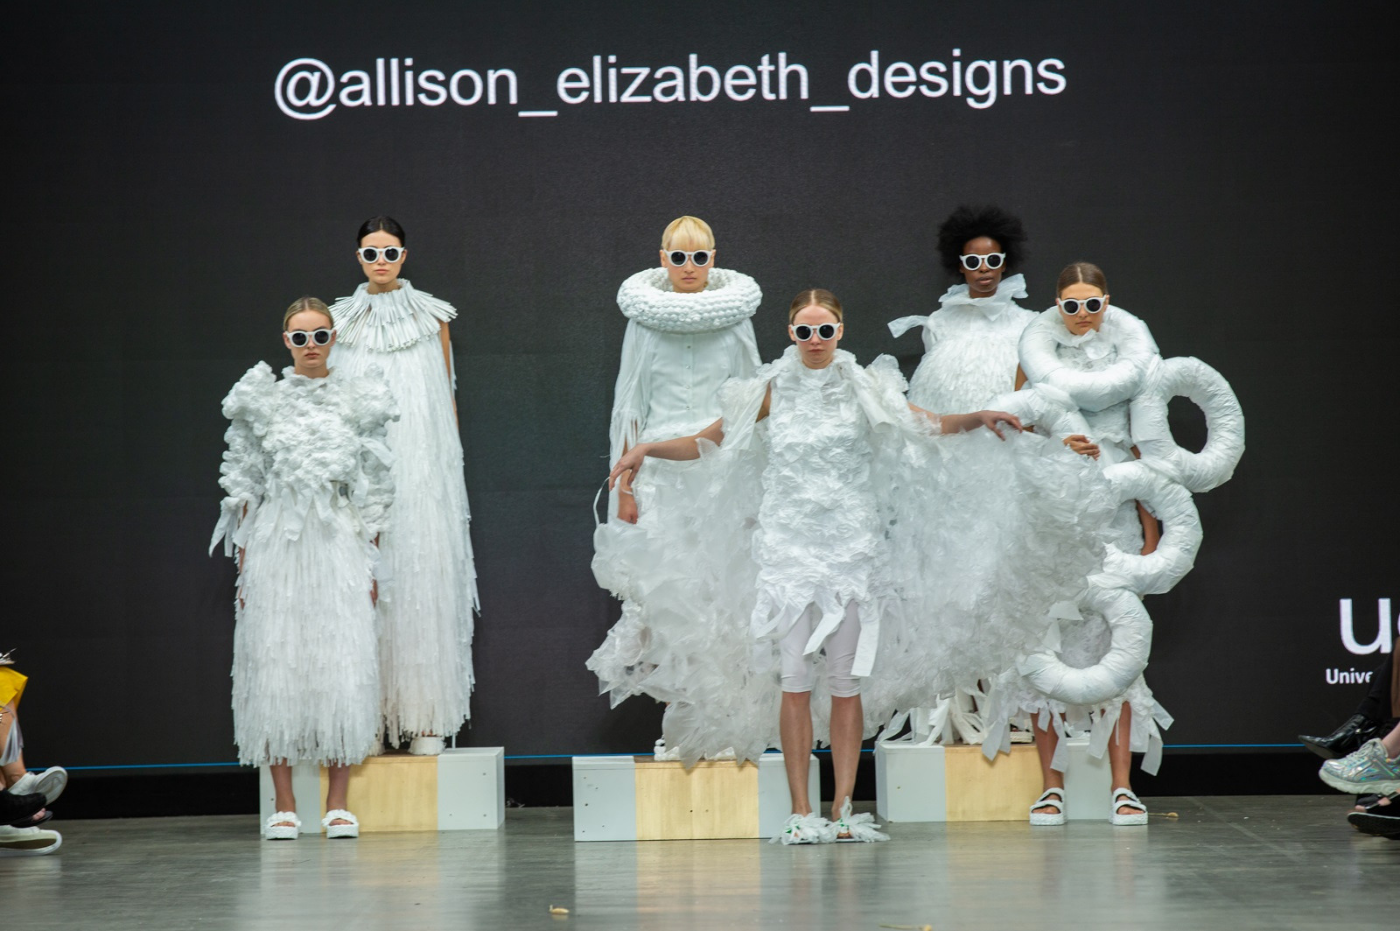 The Fusion of Cutting Edge Design Across Jewellery and Fashion in a Visual First at International Jewellery London 2019